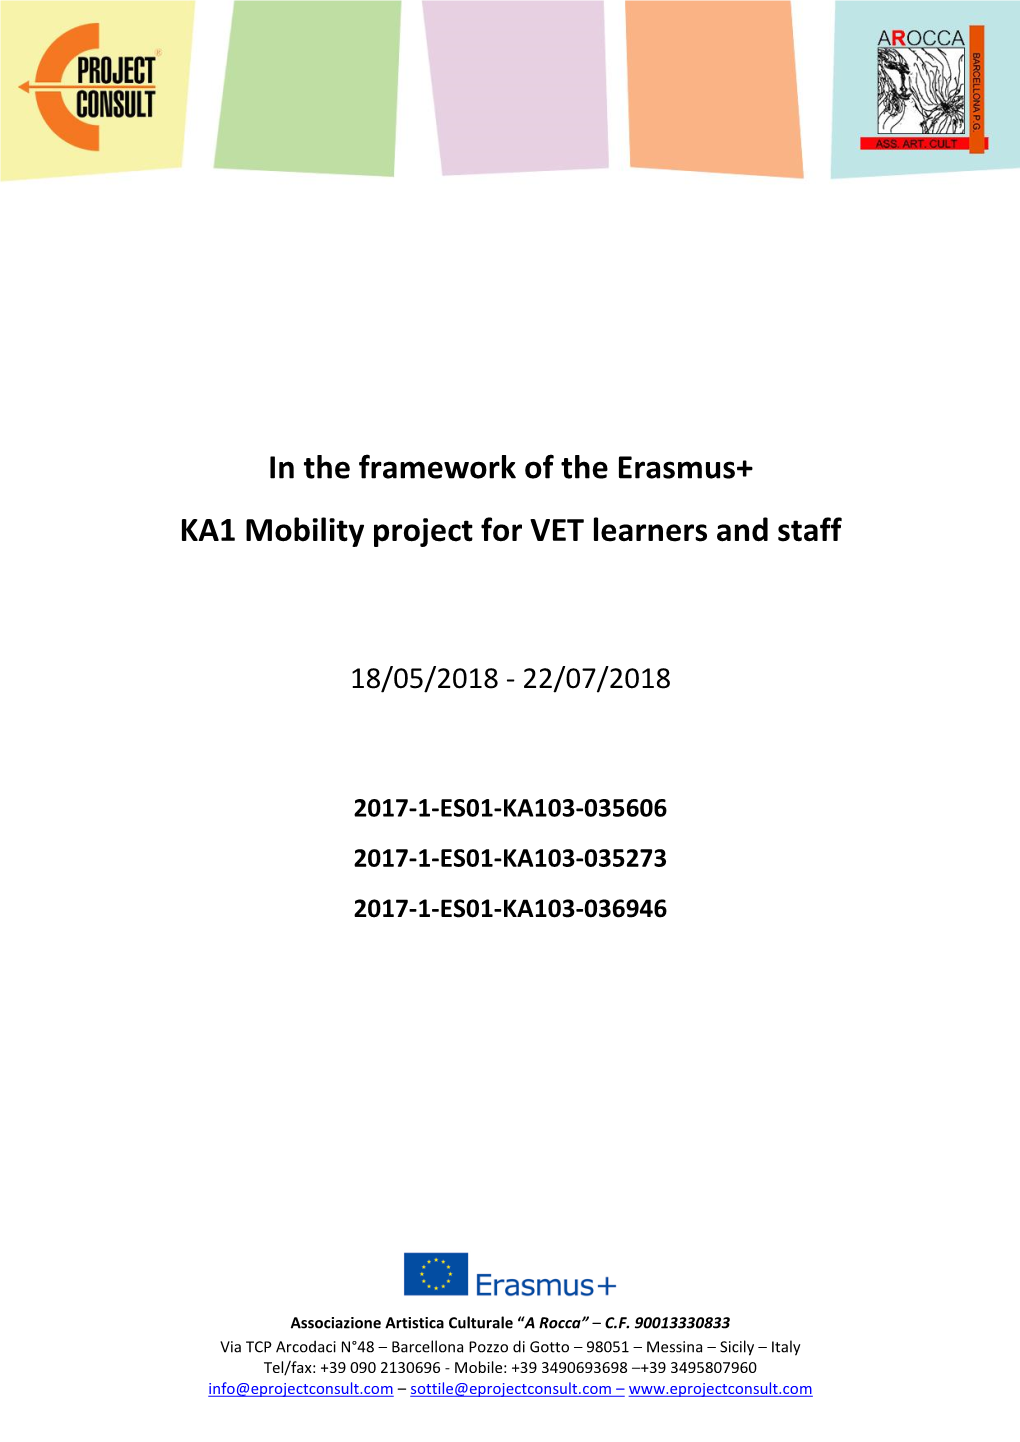 In the Framework of the Erasmus+ KA1 Mobility Project for VET Learners and Staff